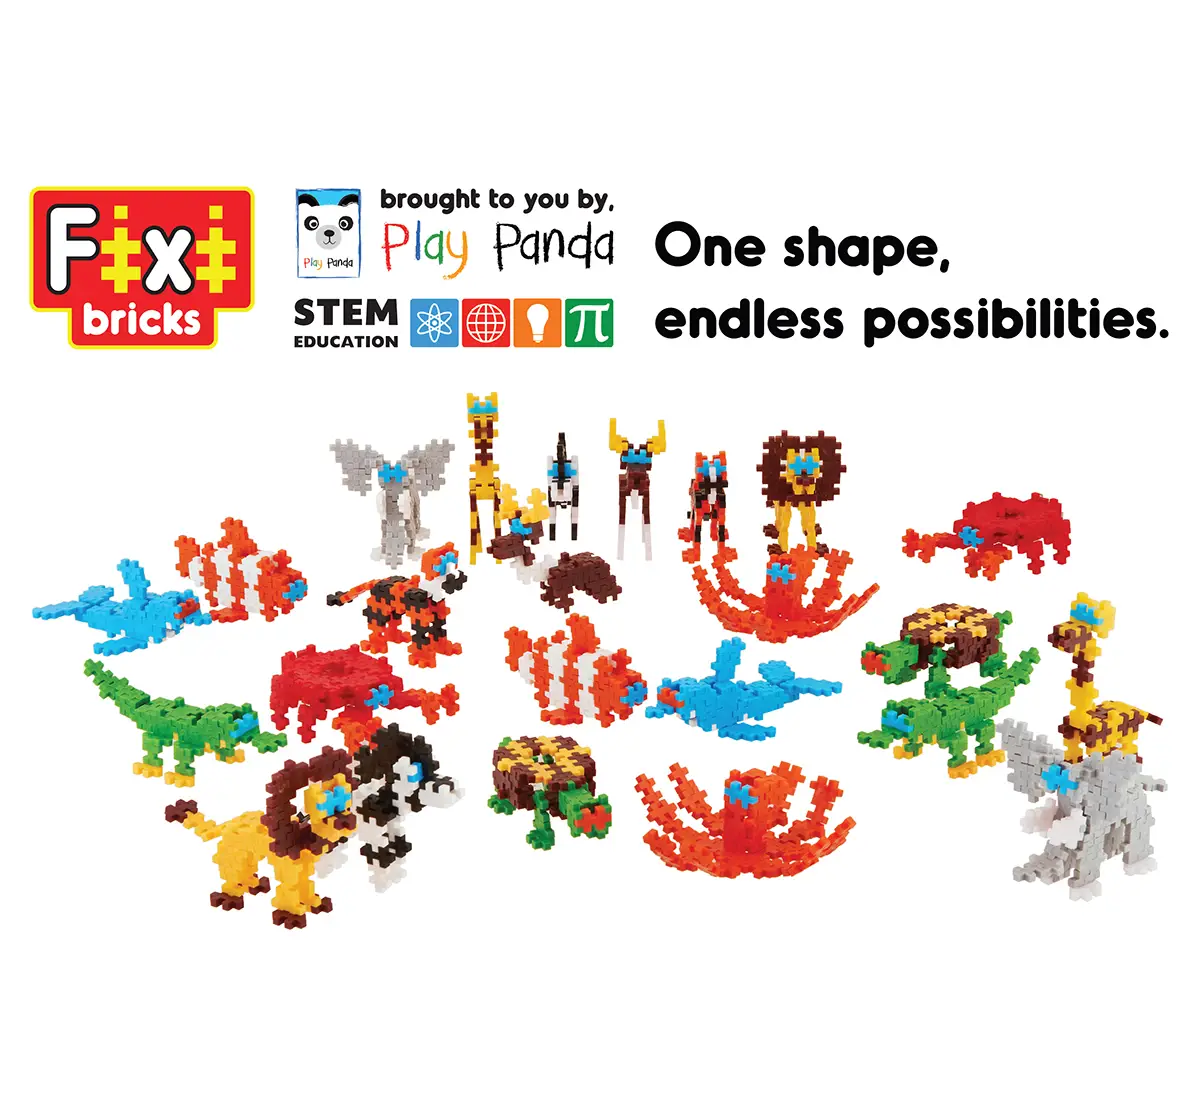 Play Panda Fixi Puzzle Jungle Set 1 - 4 Make And Play Puzzles - With 240 Pcs And Detailed Assembly Instructions - Small Parts (Age 6-99 Years) Puzzles for Kids Age 6Y+